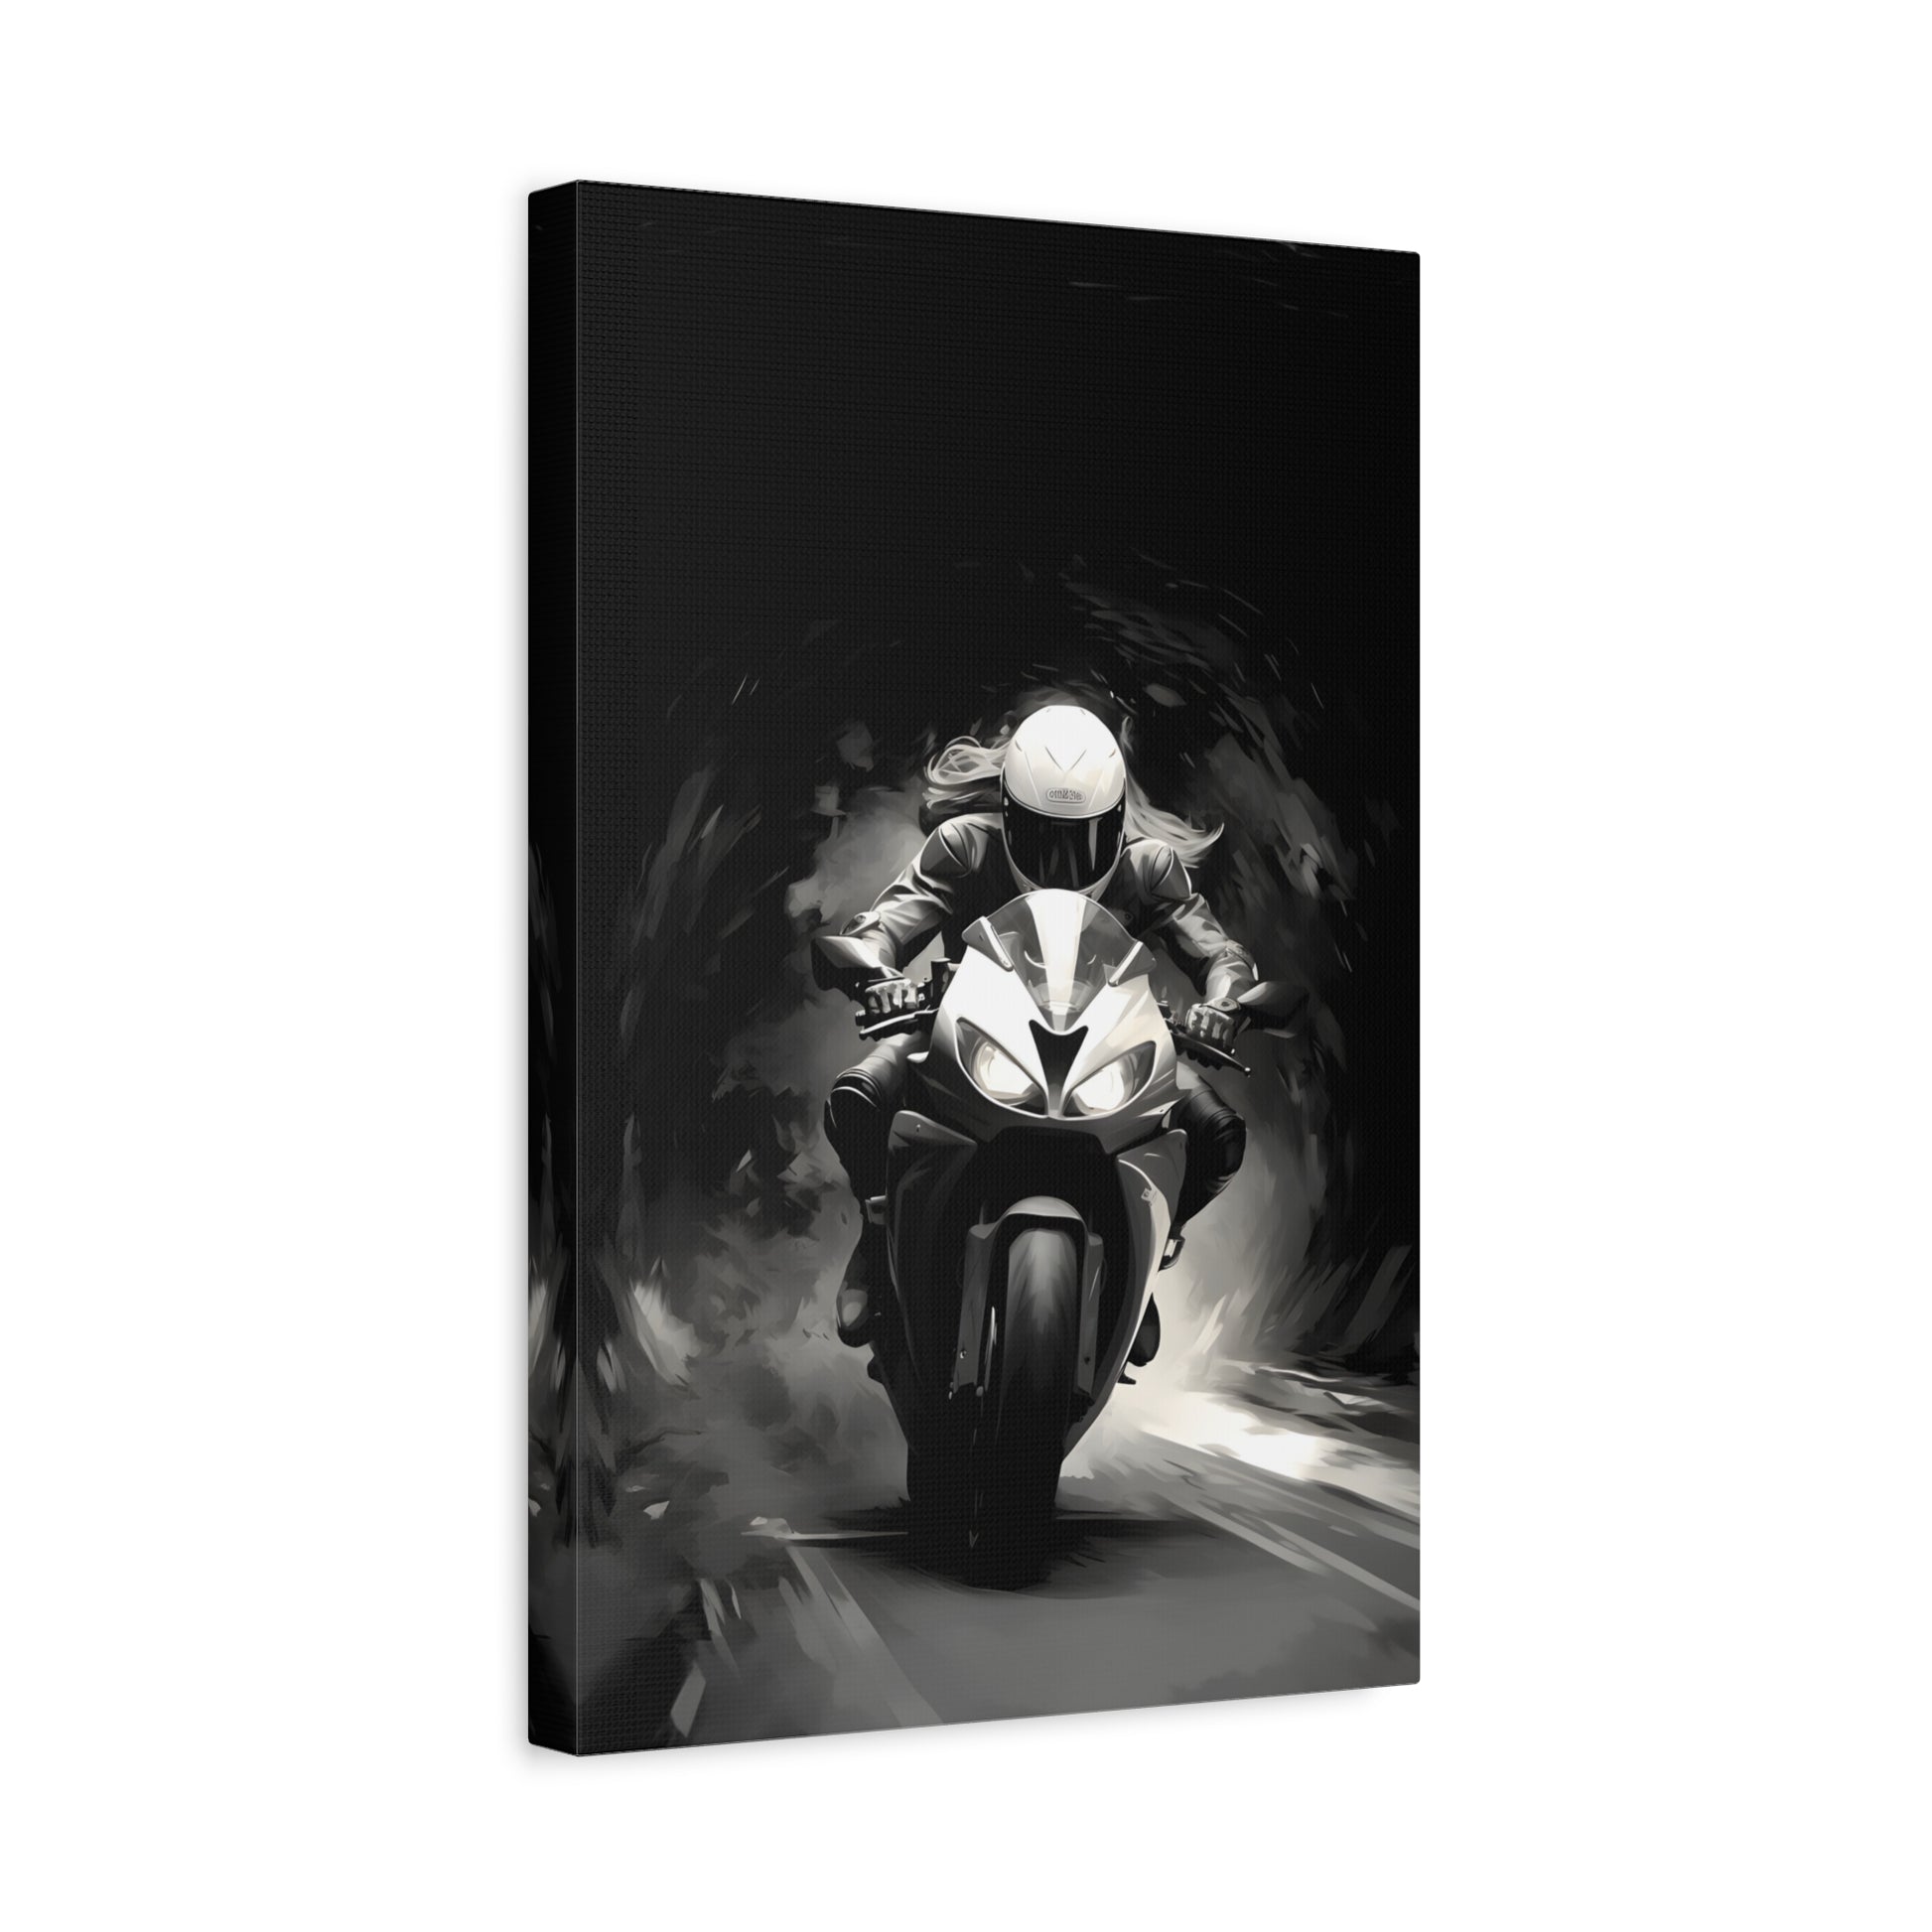 Female Night Biking (Canvas)Female Night Biking (Canvas  Matte finish, stretched, with a depth of 1.25 inches)
Struggling with low-quality canvases? Switch to RimaGallery! Our canvases are moreRimaGallery